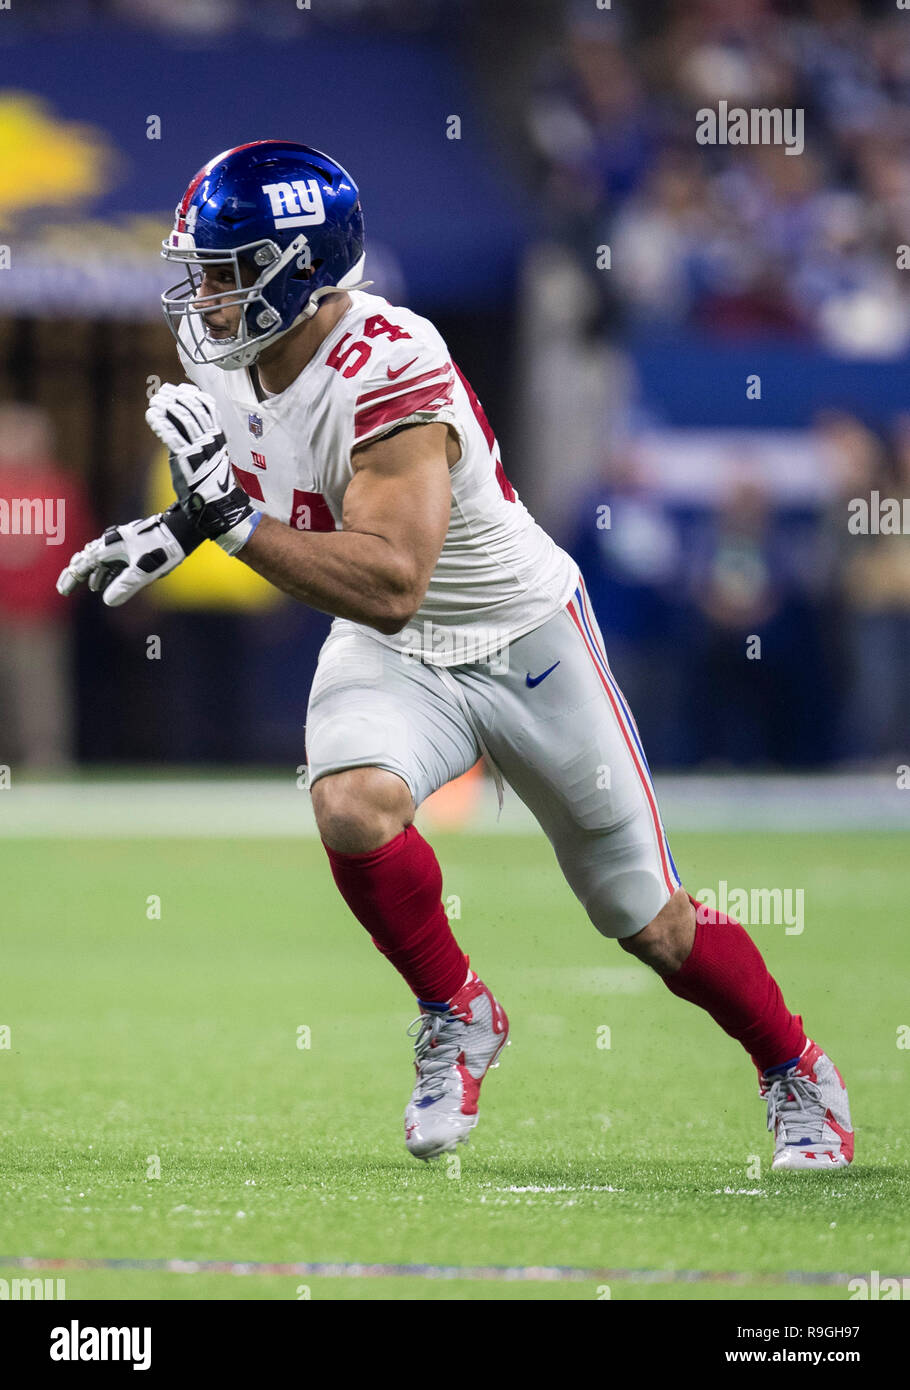 Indianapolis, Indiana, USA. 23rd Dec, 2018. New York Giants linebacker Olivier Vernon (54) during NFL football game action between the New York Giants and the Indianapolis Colts at Lucas Oil Stadium in Indianapolis, Indiana. Indianapolis defeated New York 28-27. John Mersits/CSM/Alamy Live News Stock Photo